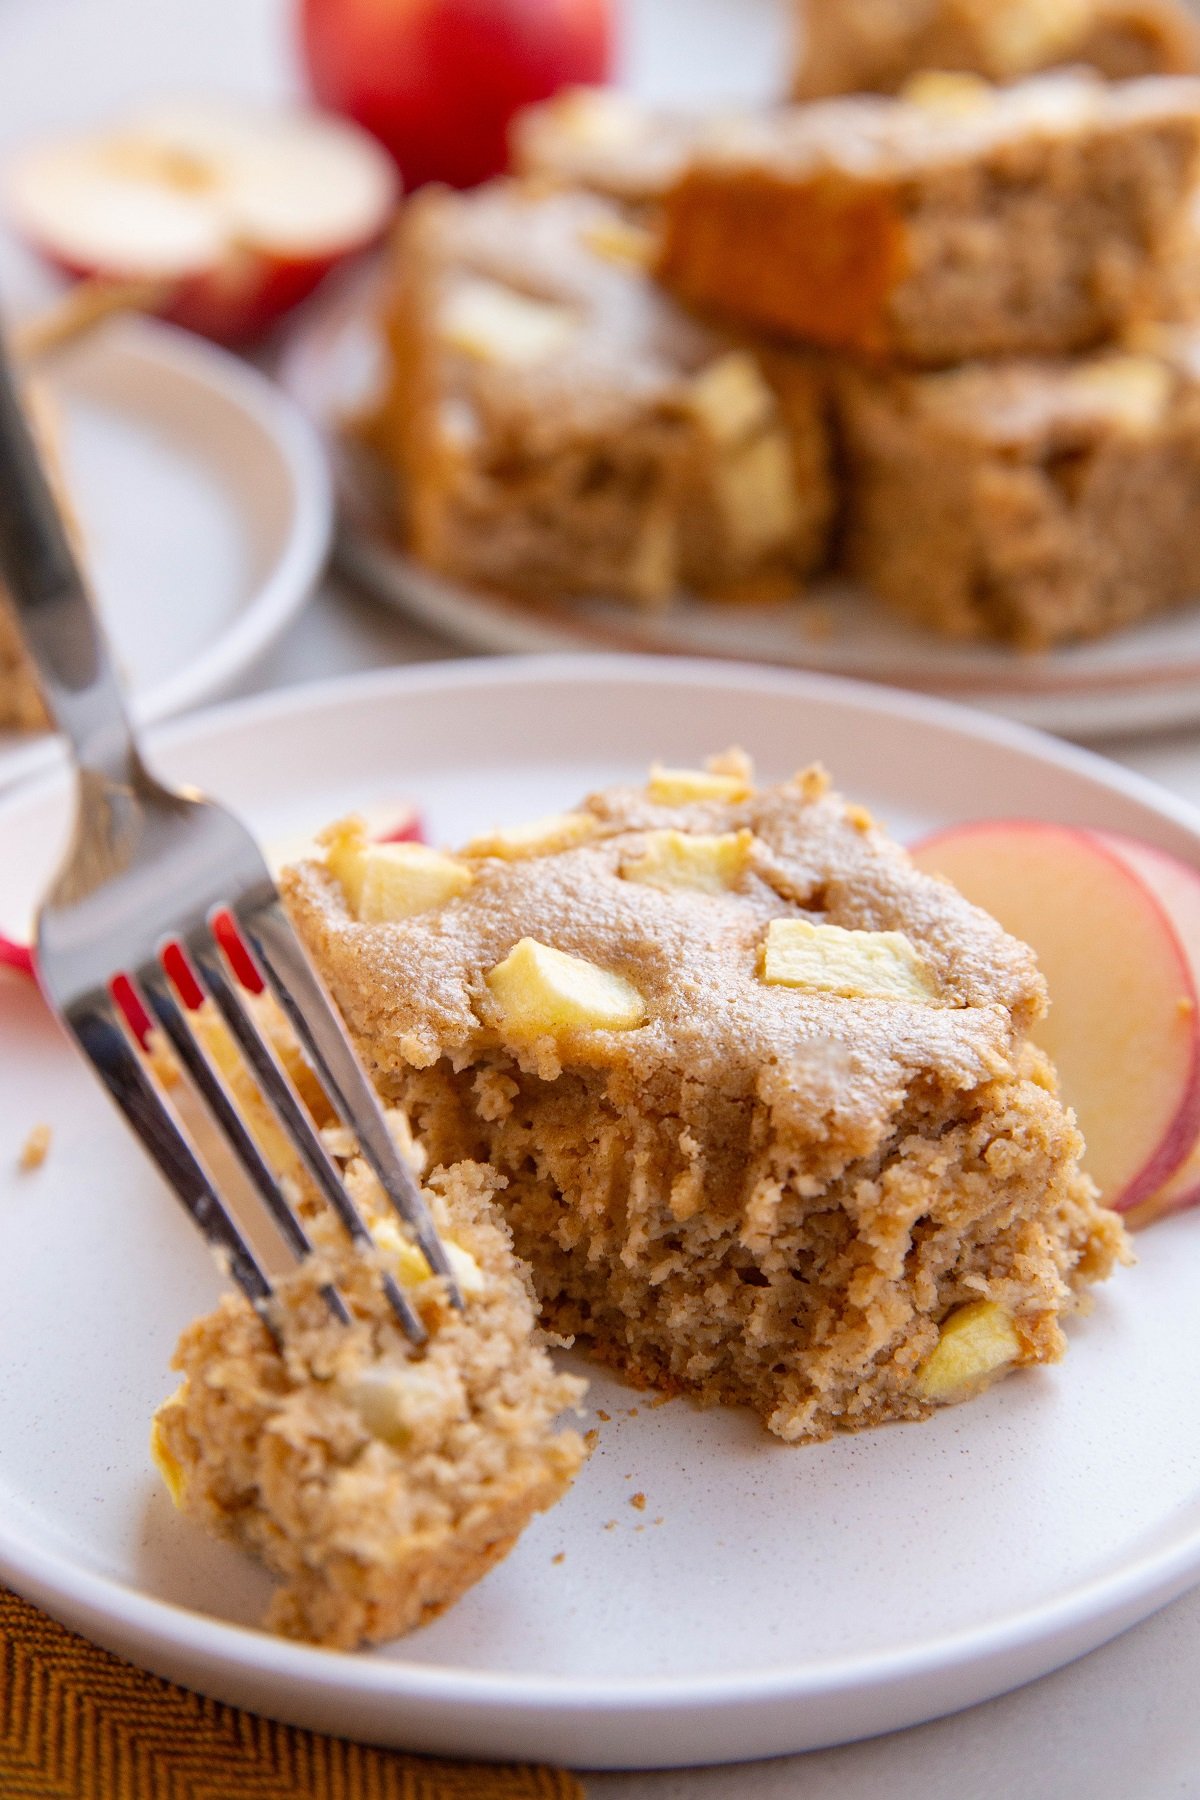 Slice of apple cake on a plate with a fork taking a bite out of it.